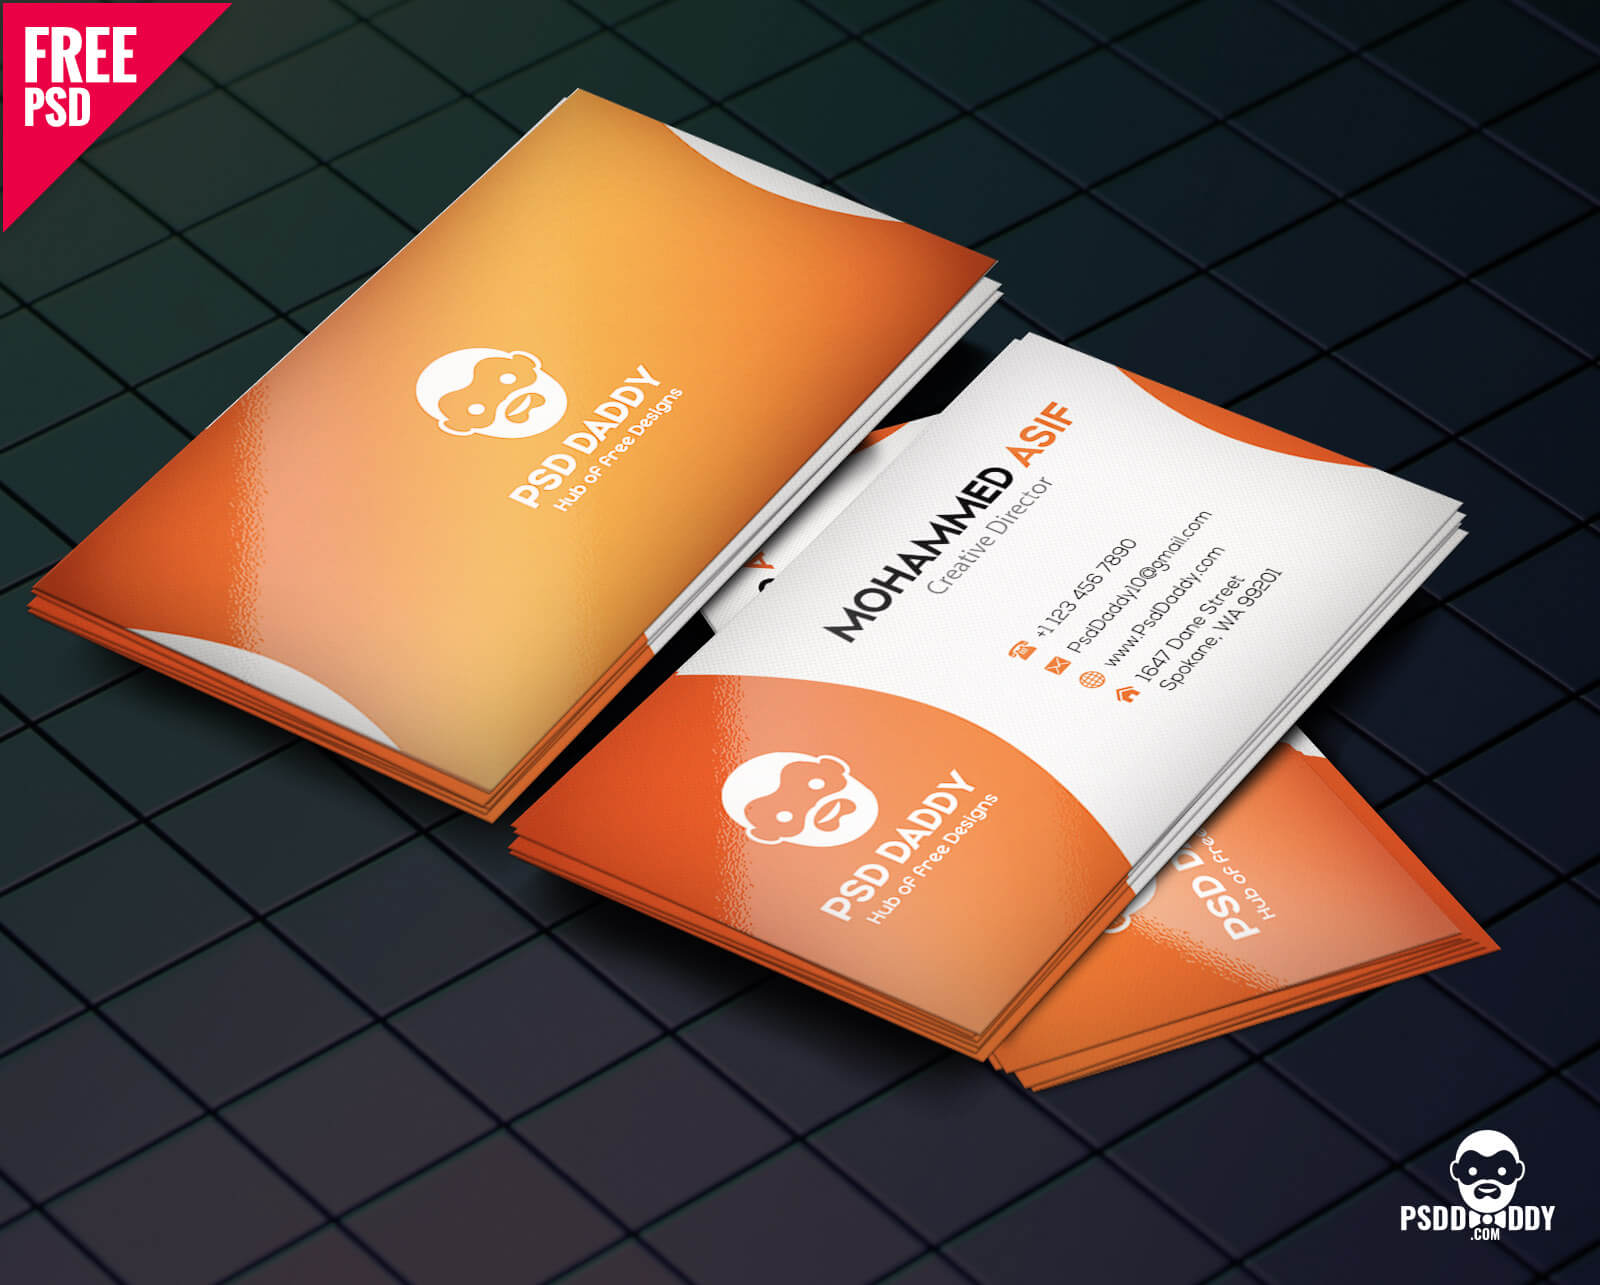 Download] Business Card Design Psd Free | Psddaddy With Visiting Card Psd Template Free Download